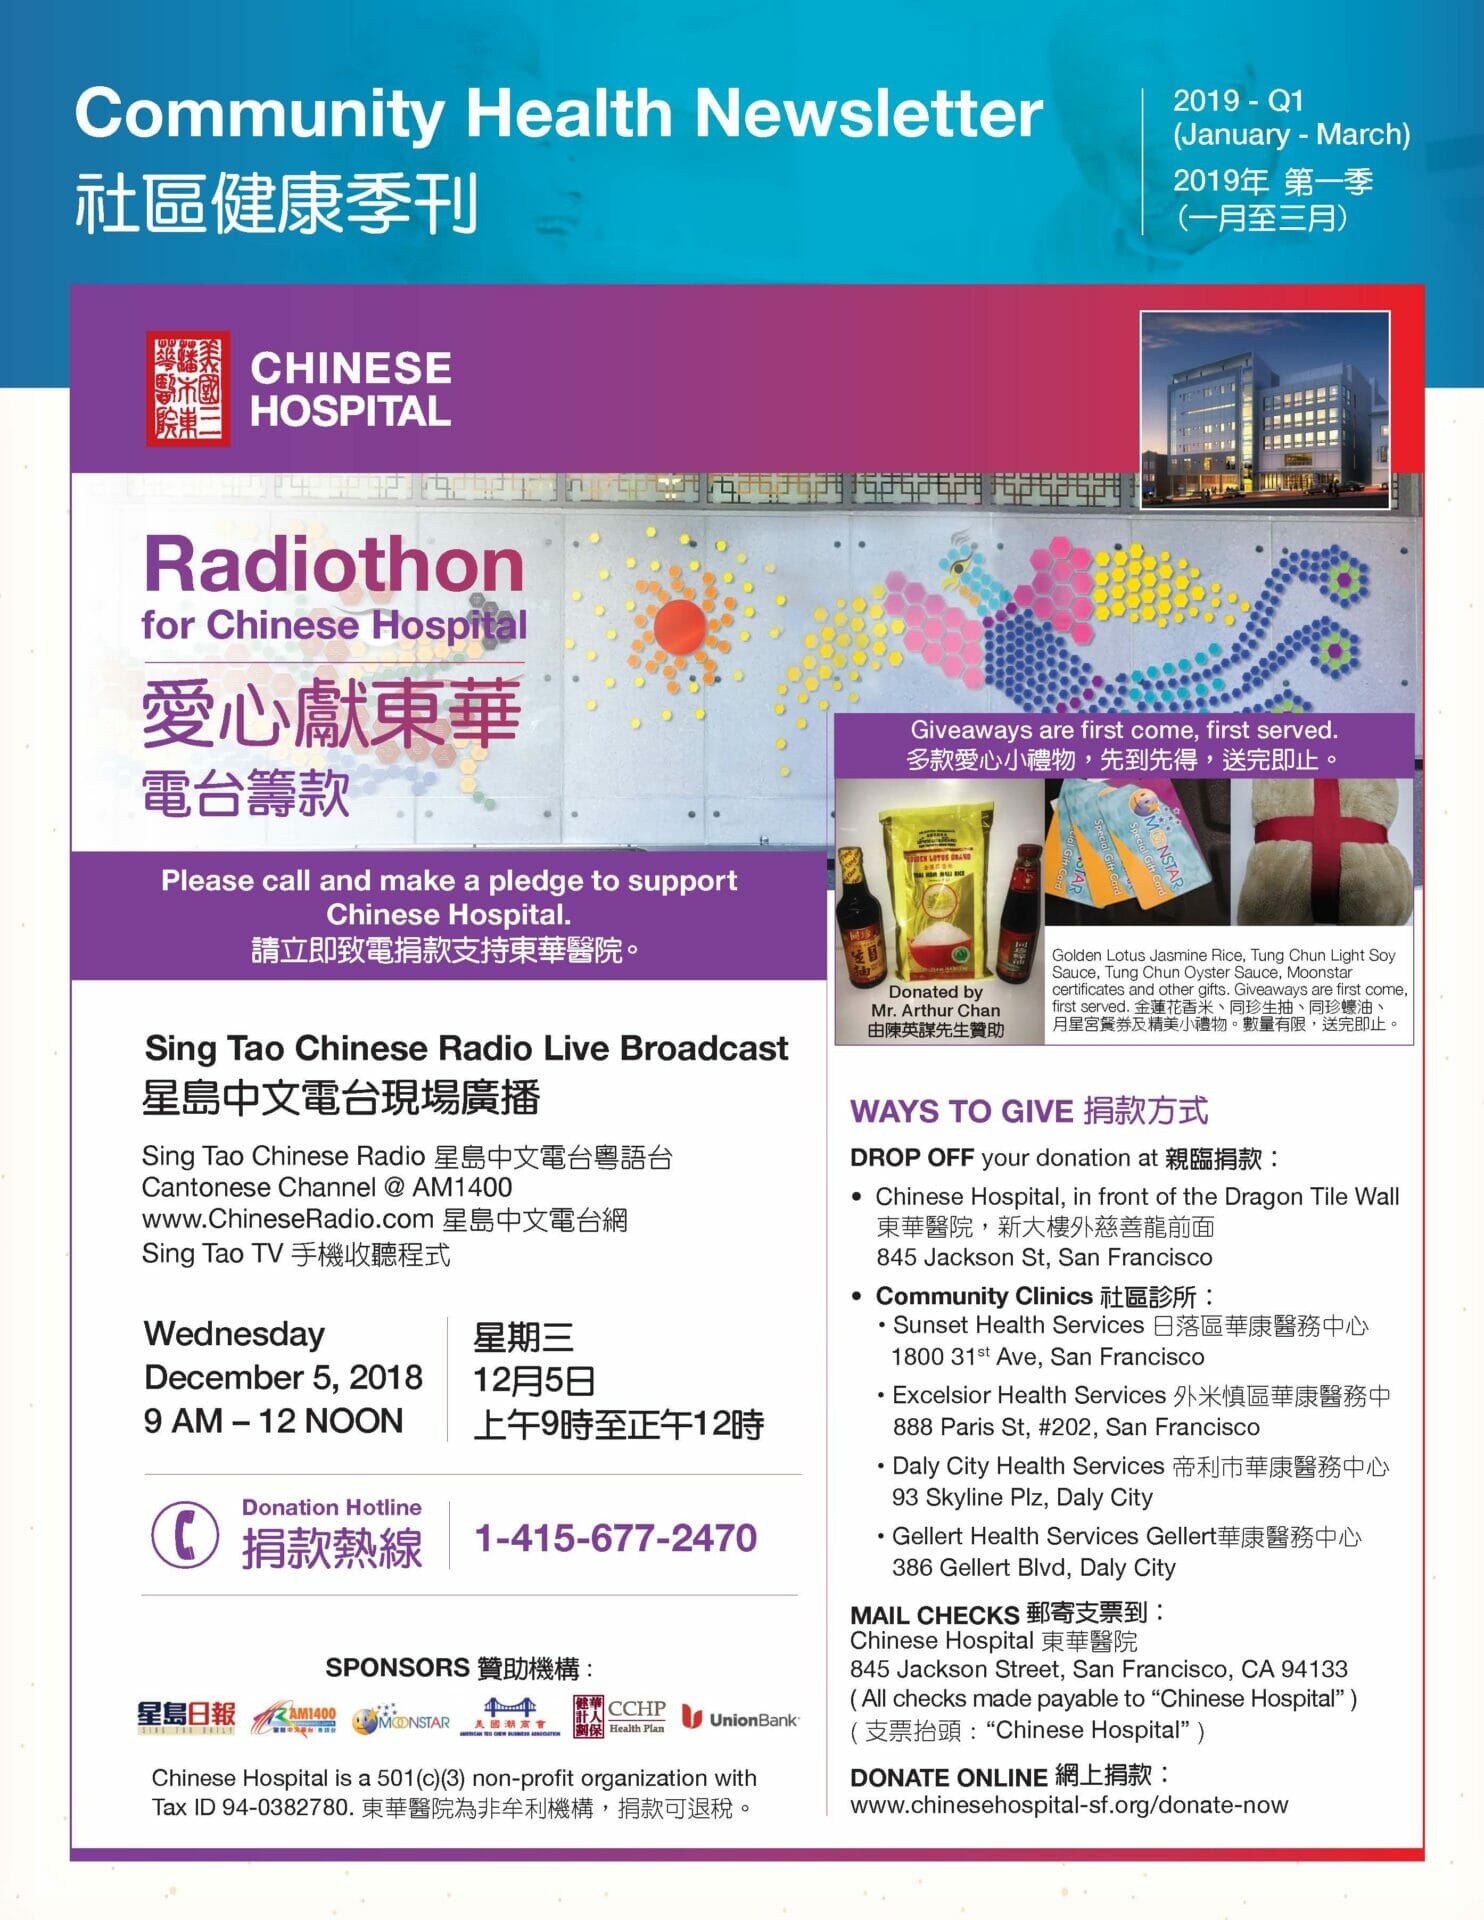 CCHP 2019 q1 newsletter, information of Chhinese Hospital